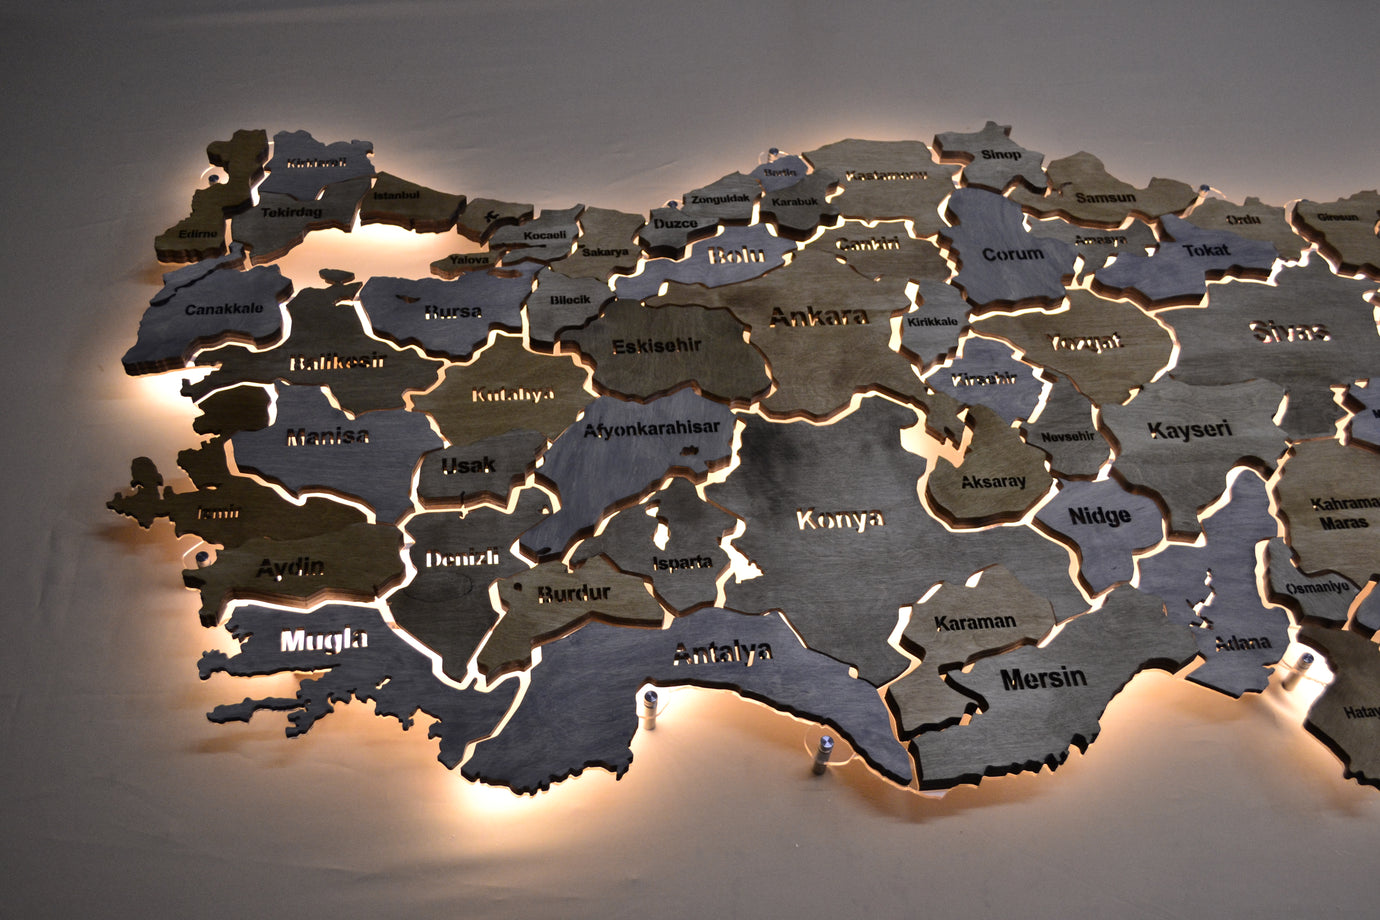 Turkey LED map on acrylic glass with backlighting between regions color Nerium